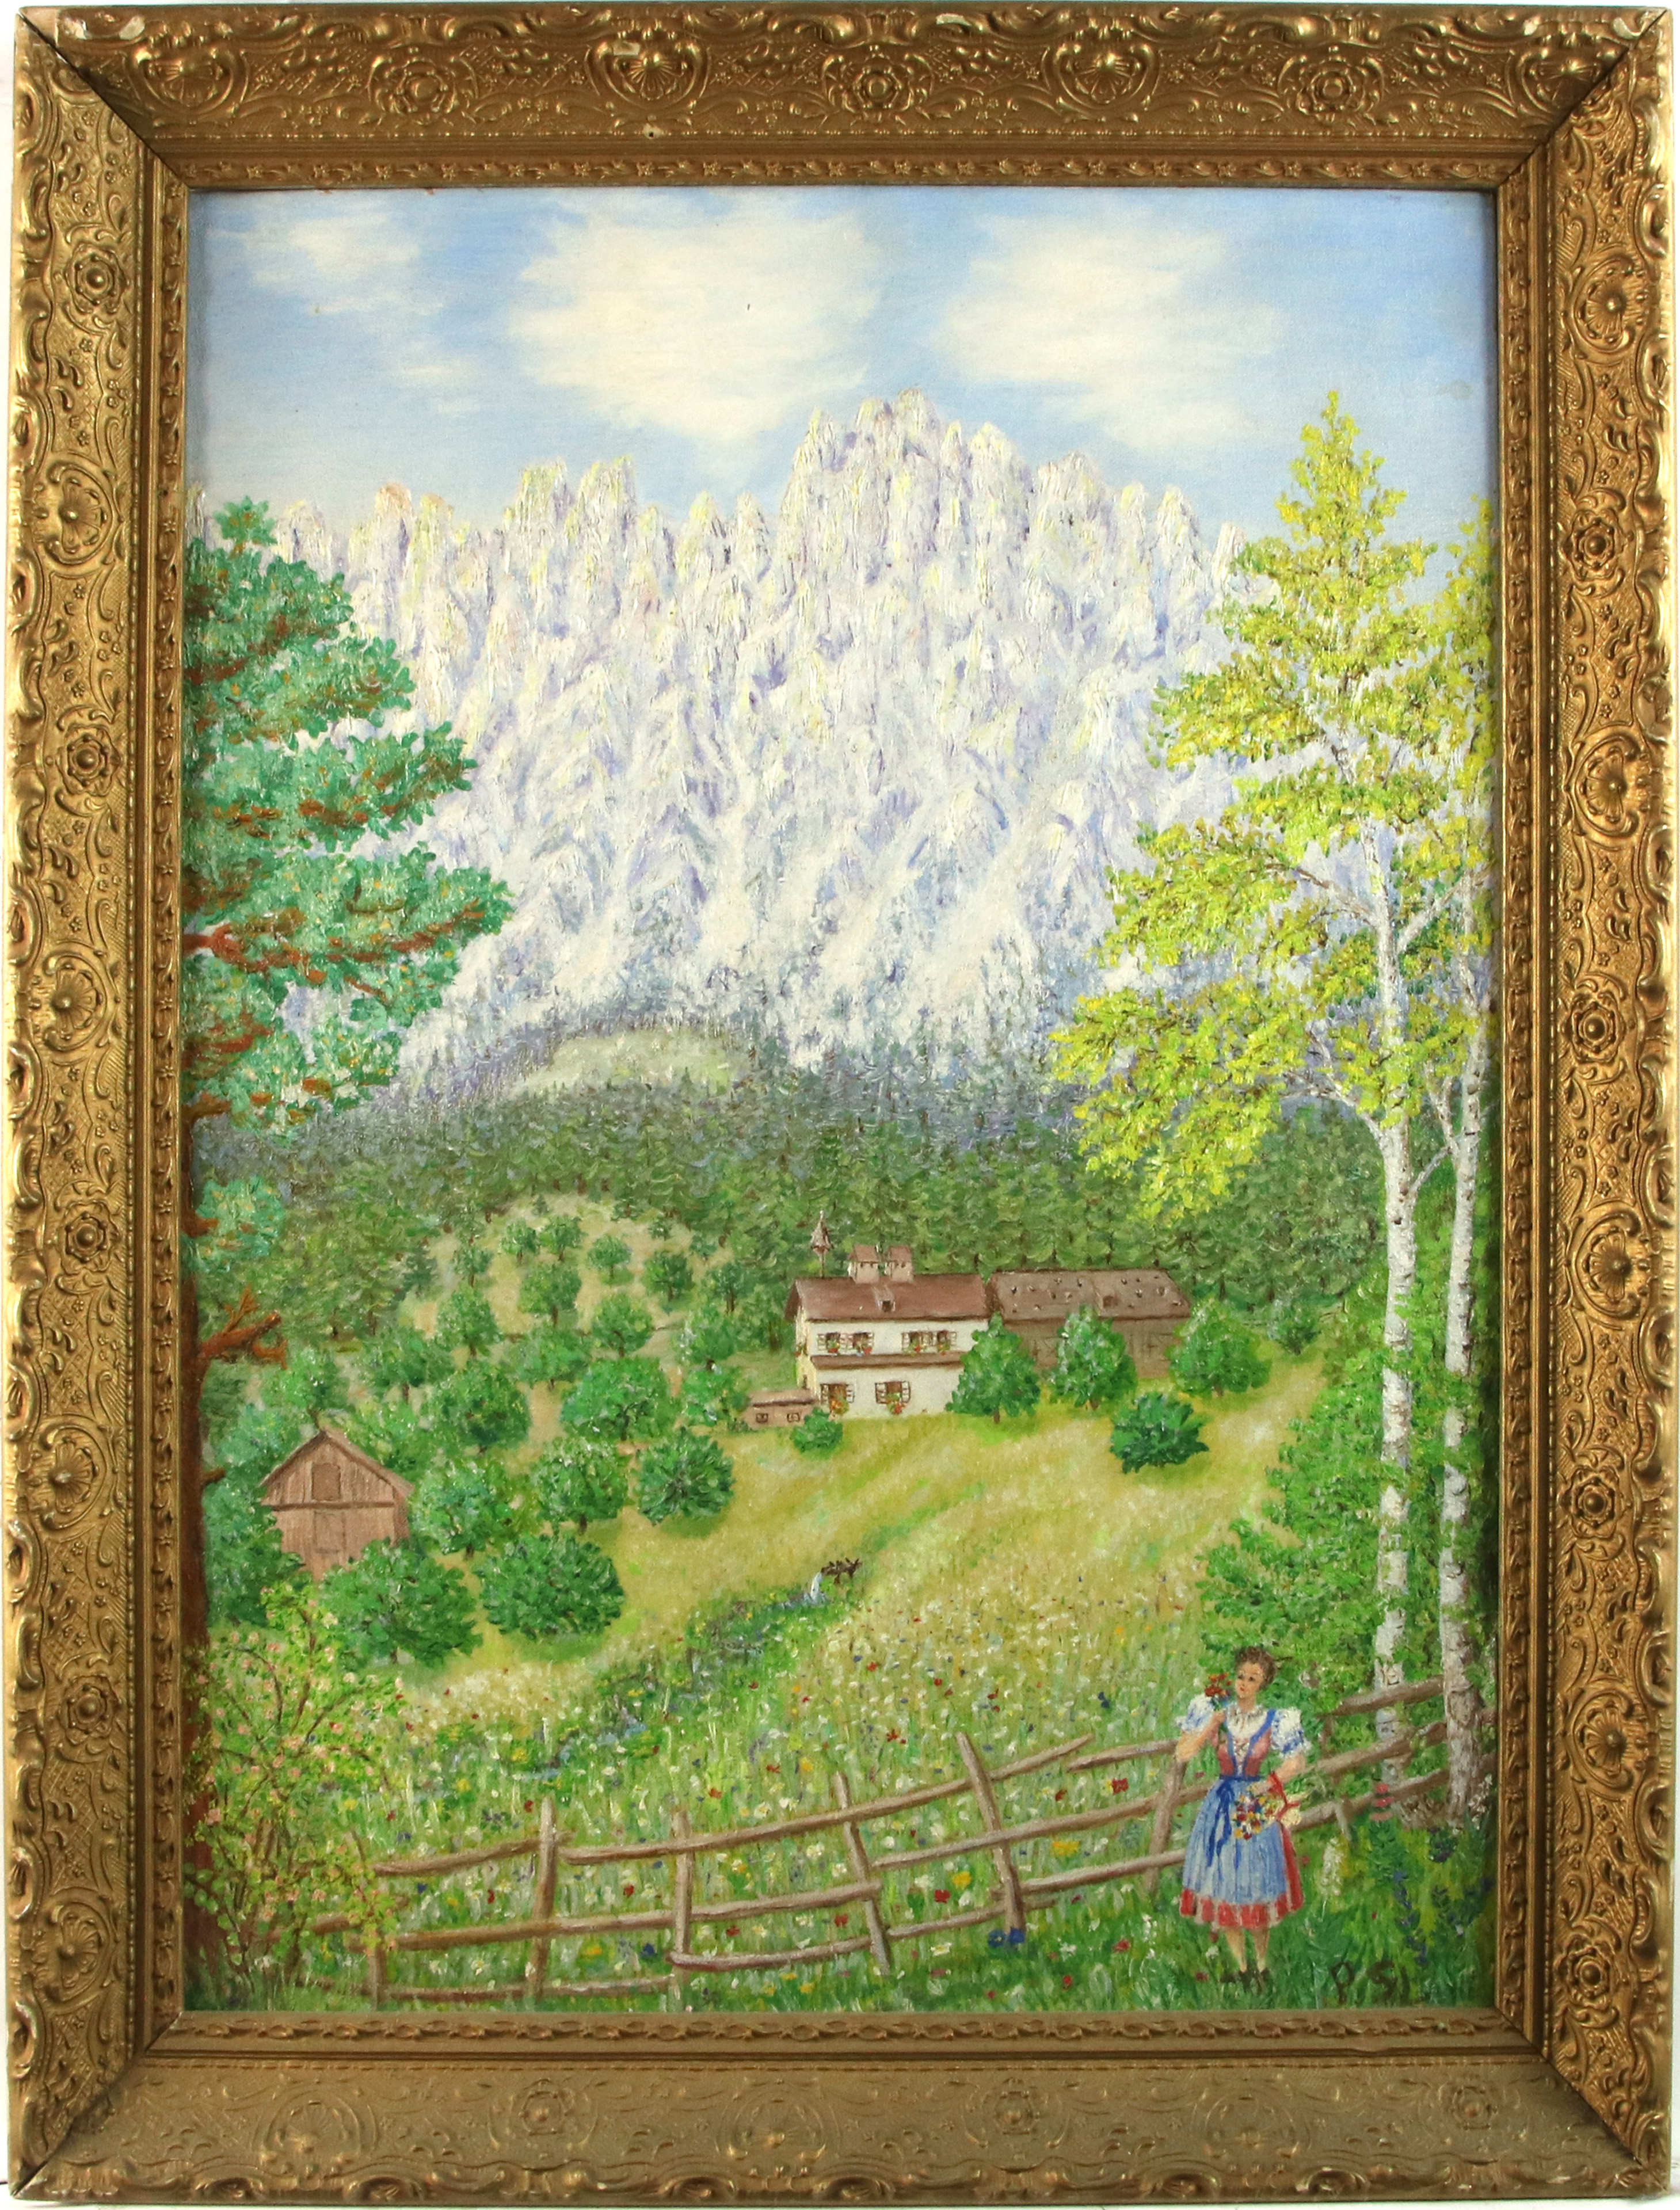 PAINTING IN THE ALPS In the Alps  3a4e5c